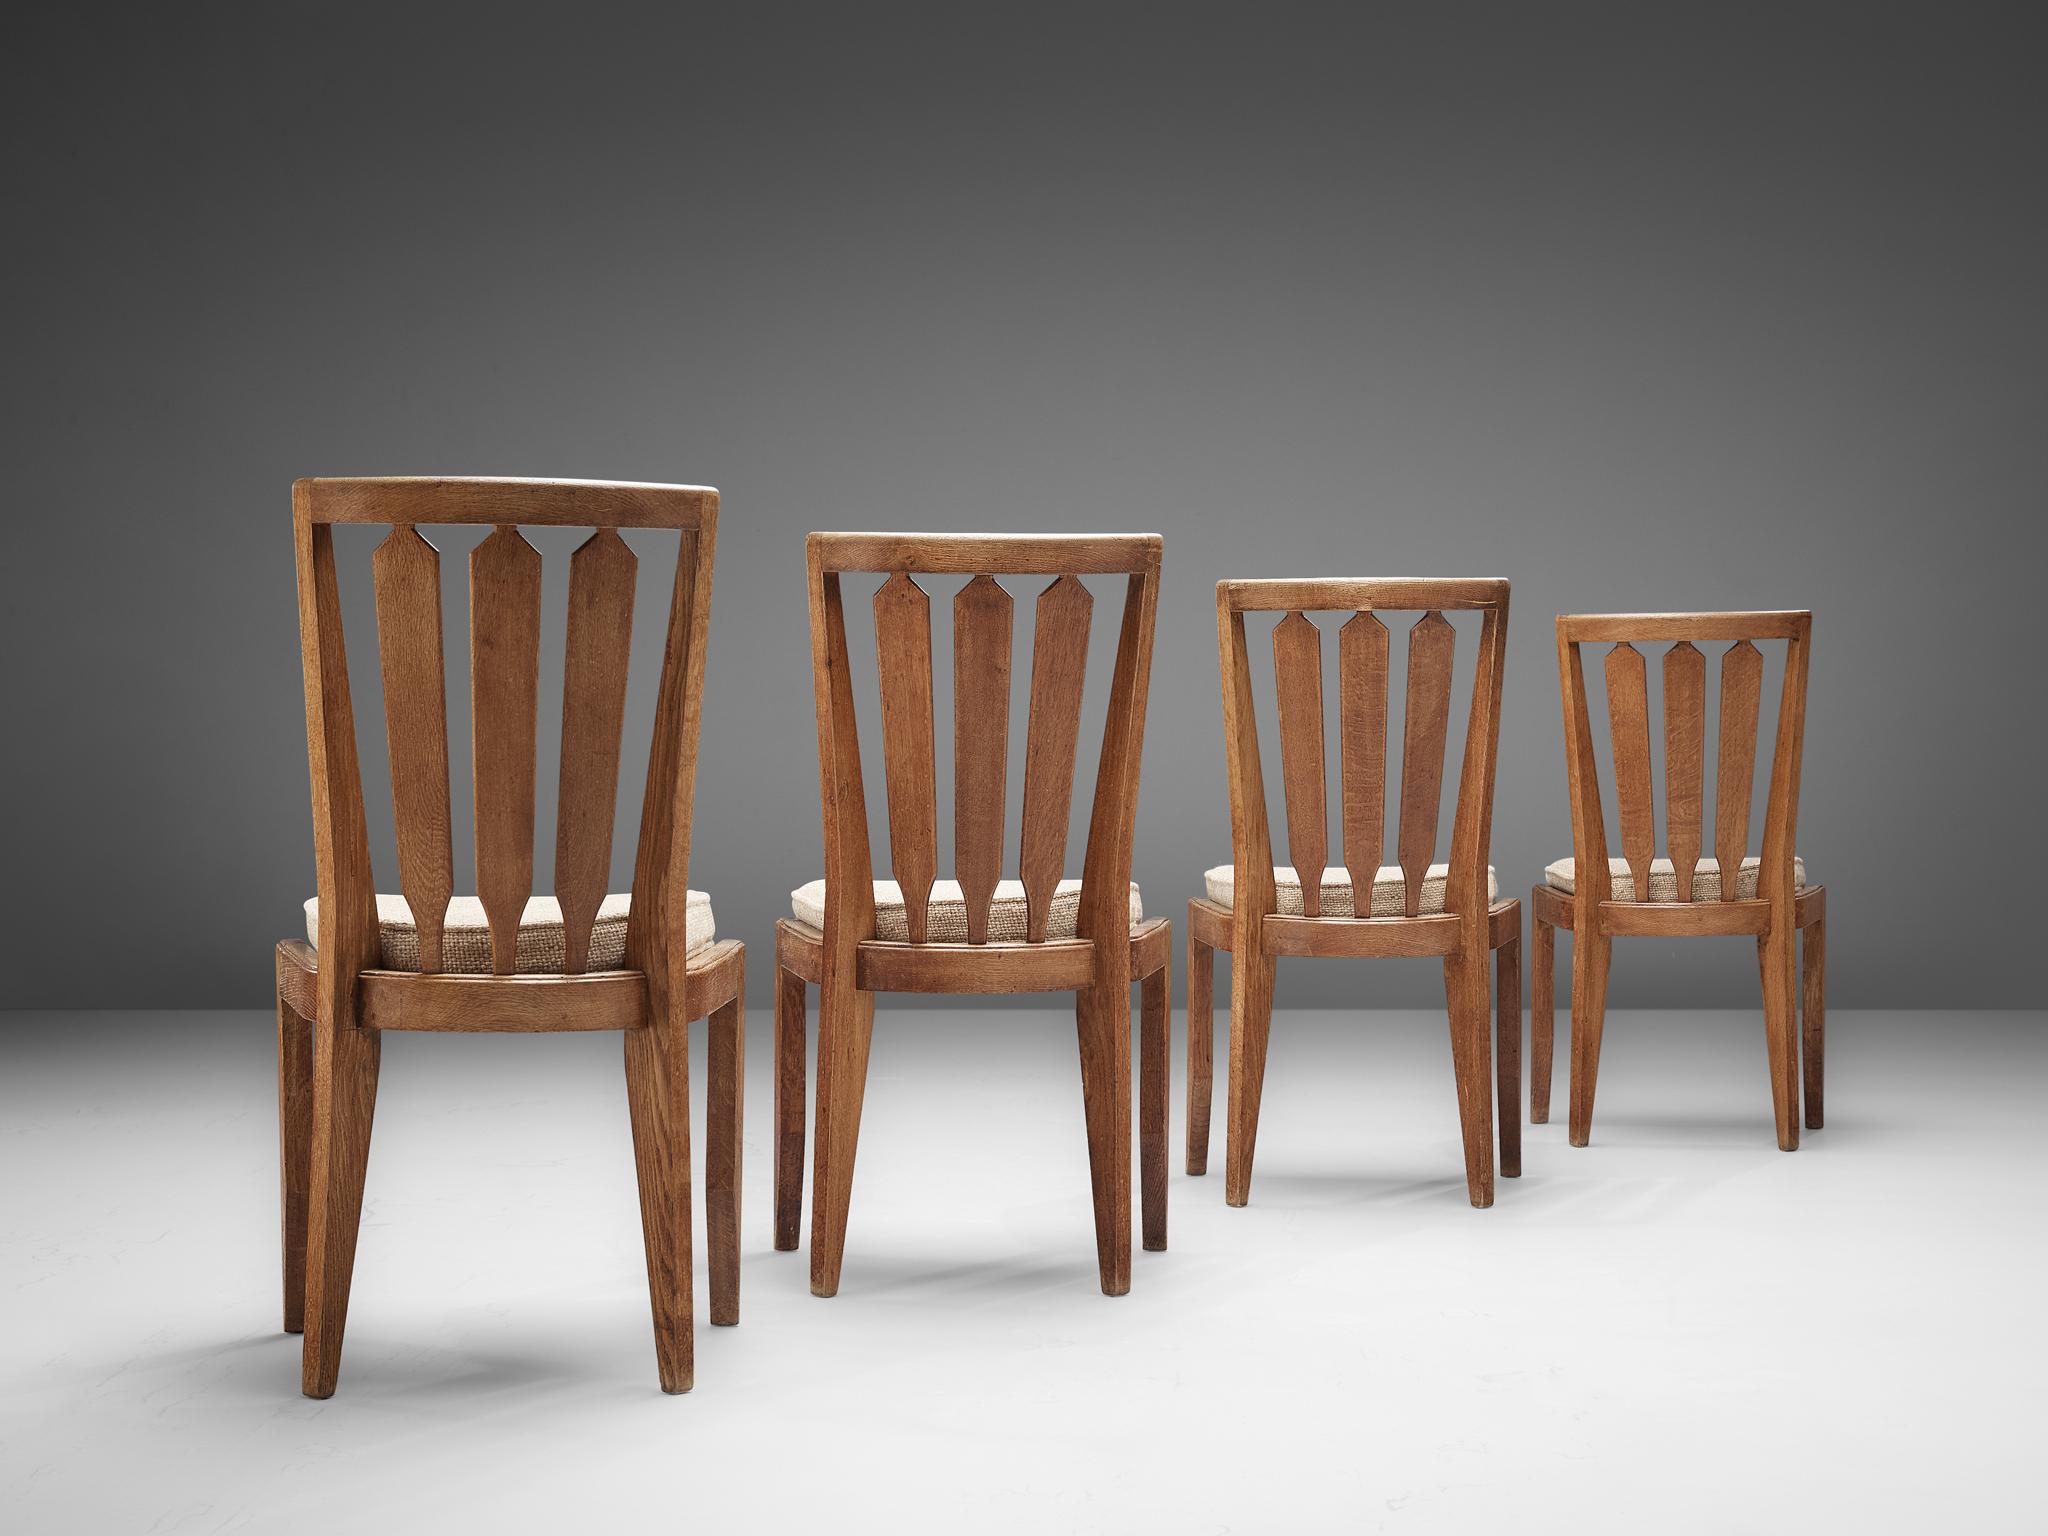 Set of four dining chairs, in oak and fabric upholstery, by Guillerme & Chambron, France, 1960s.

Set of four sturdy, decorative dining chairs in solid oak by Guillerme & Chambron. Notable is the solid oak frame with the highly decorative and